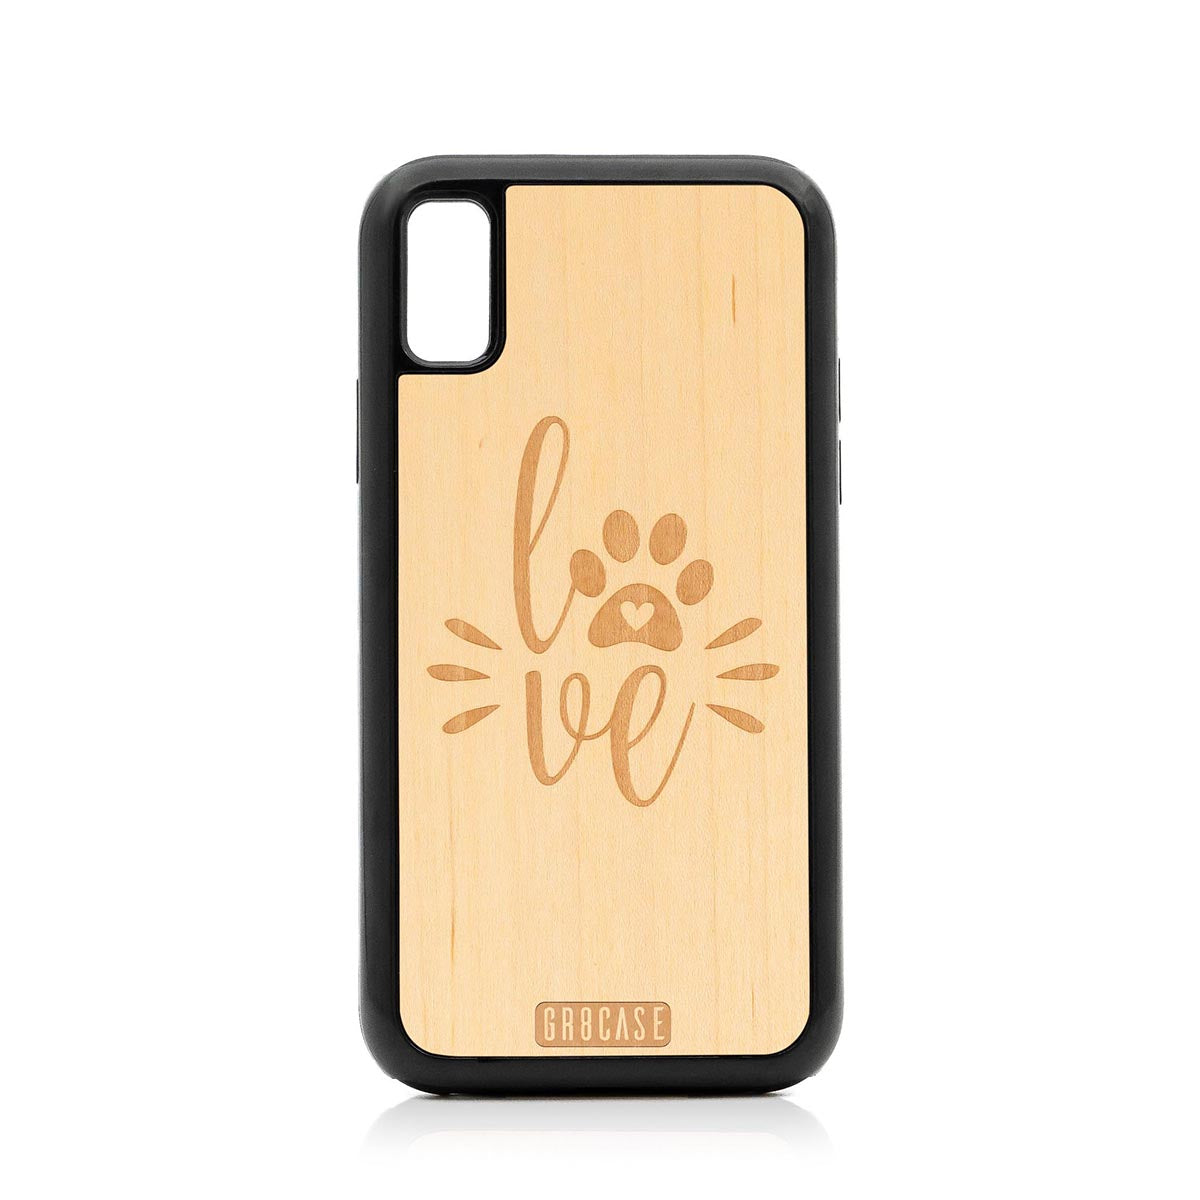 Paw Love Design Wood Case For iPhone X/XS by GR8CASE